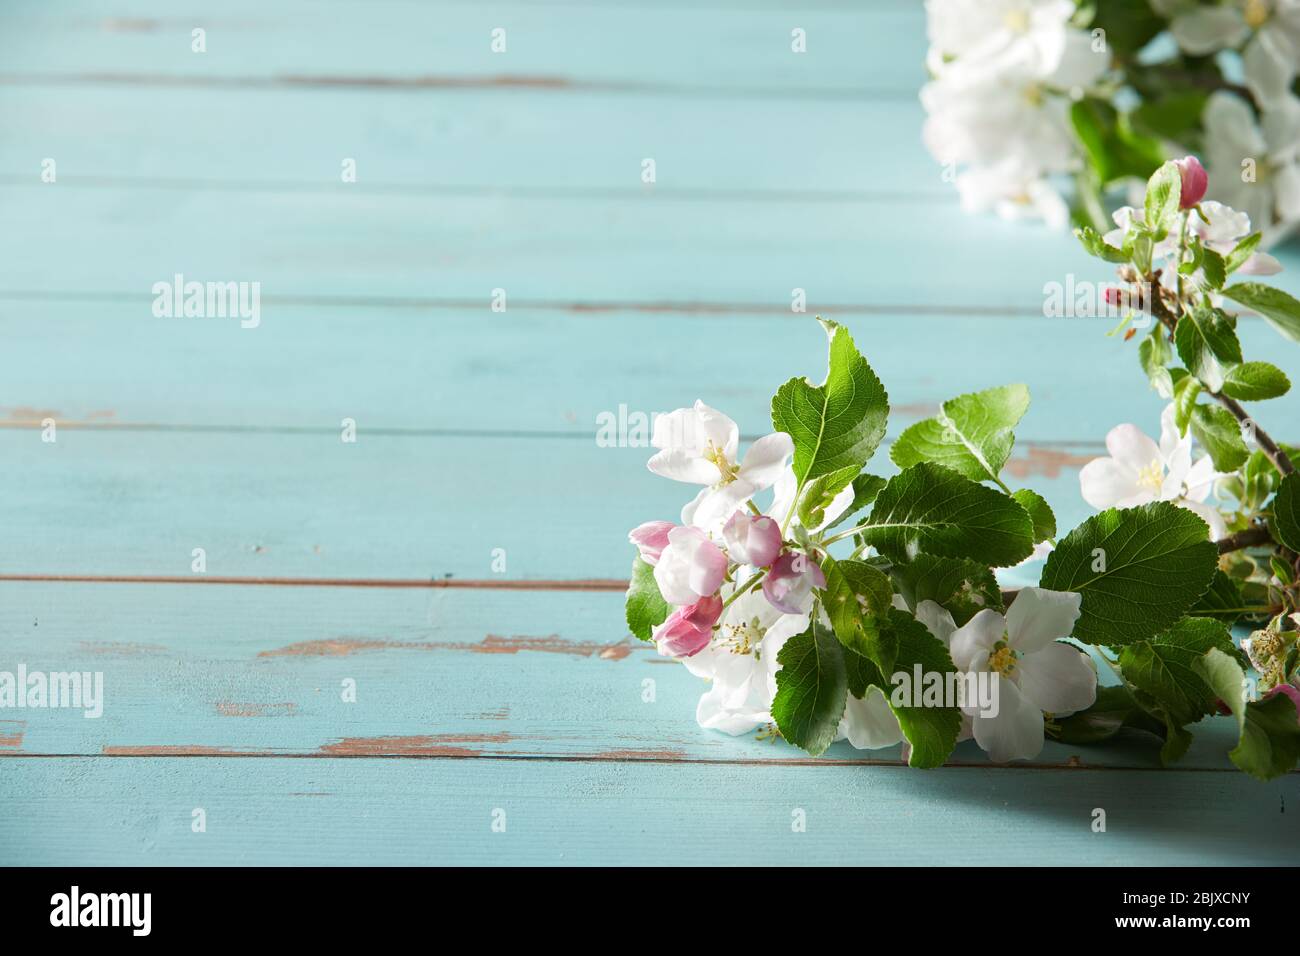 Close up on fresh white spring blossom tinged with pink with young green leaves forming a side border on rustic blue painted wood with copy space Stock Photo